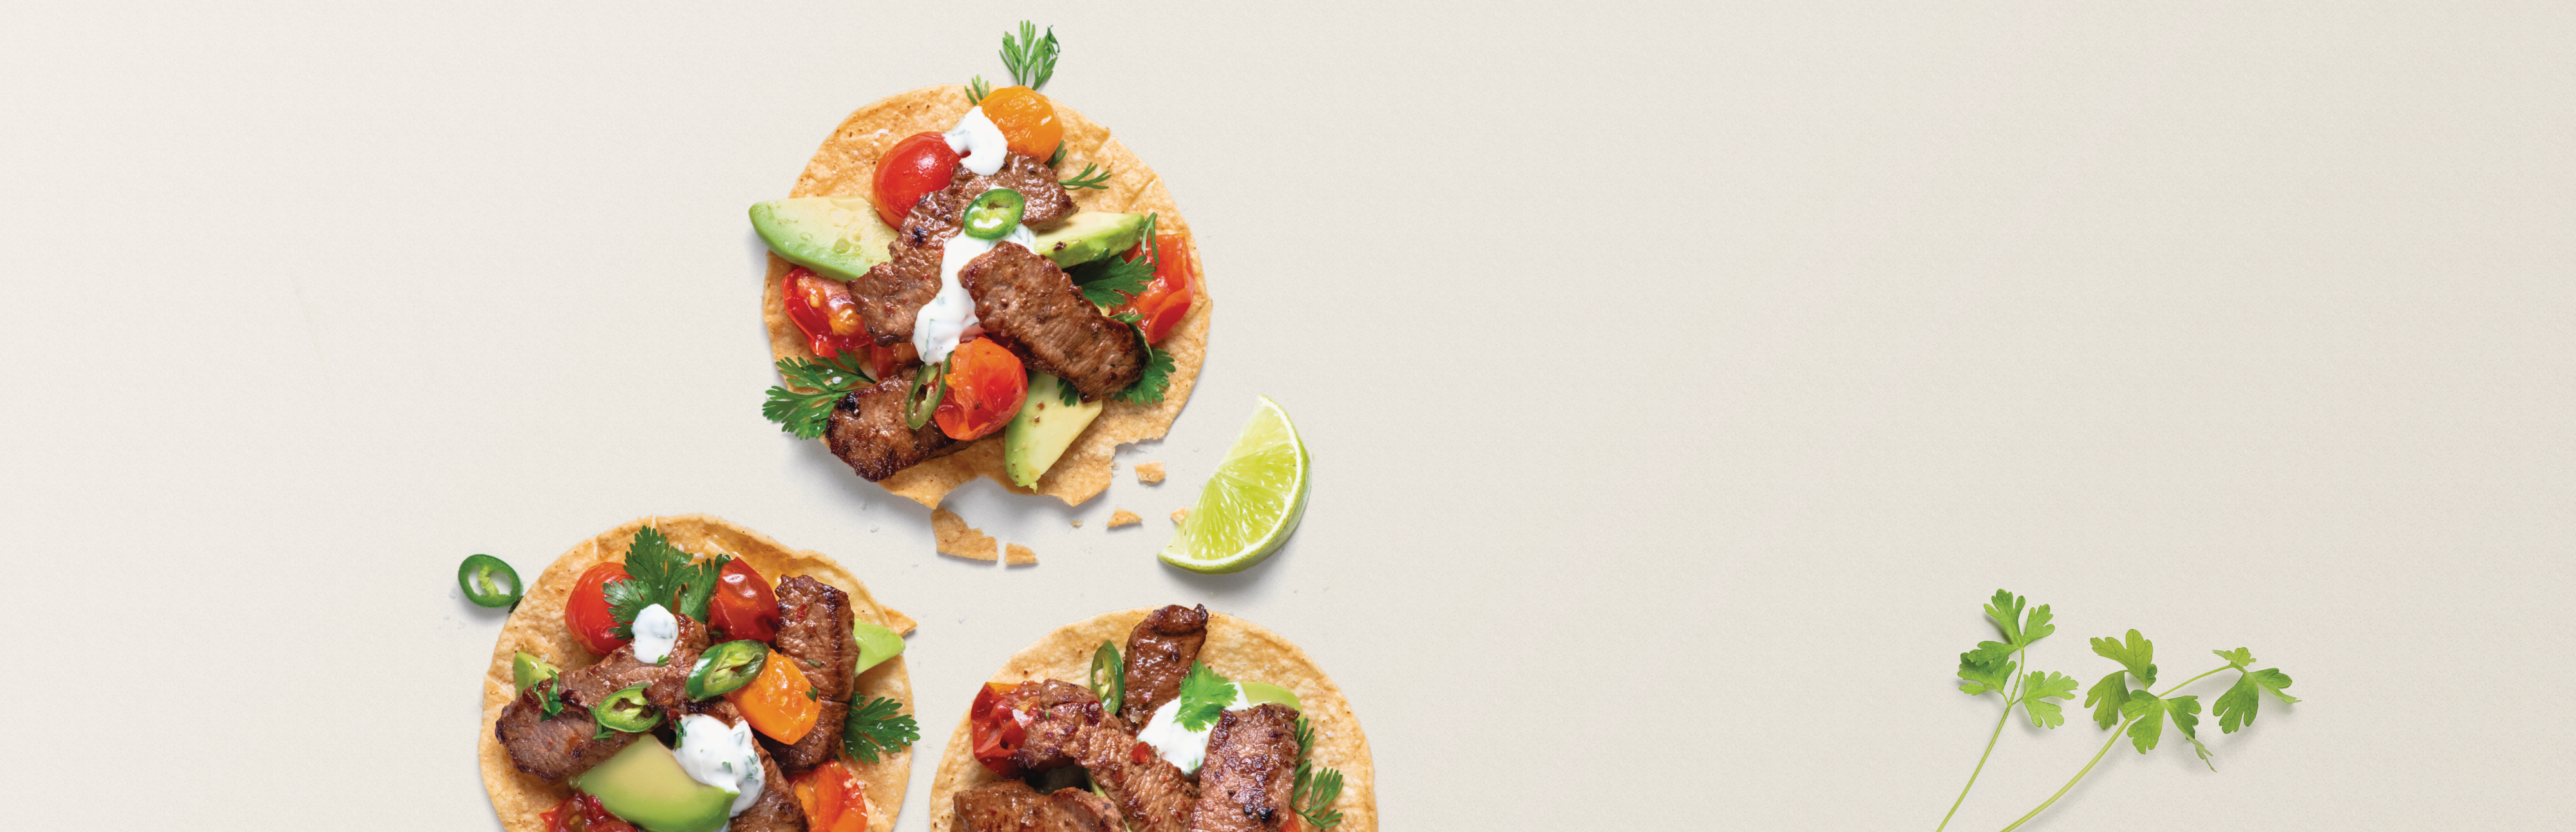 Lamb Stir-Fry Tostadas with Coriander and Lime Dressing